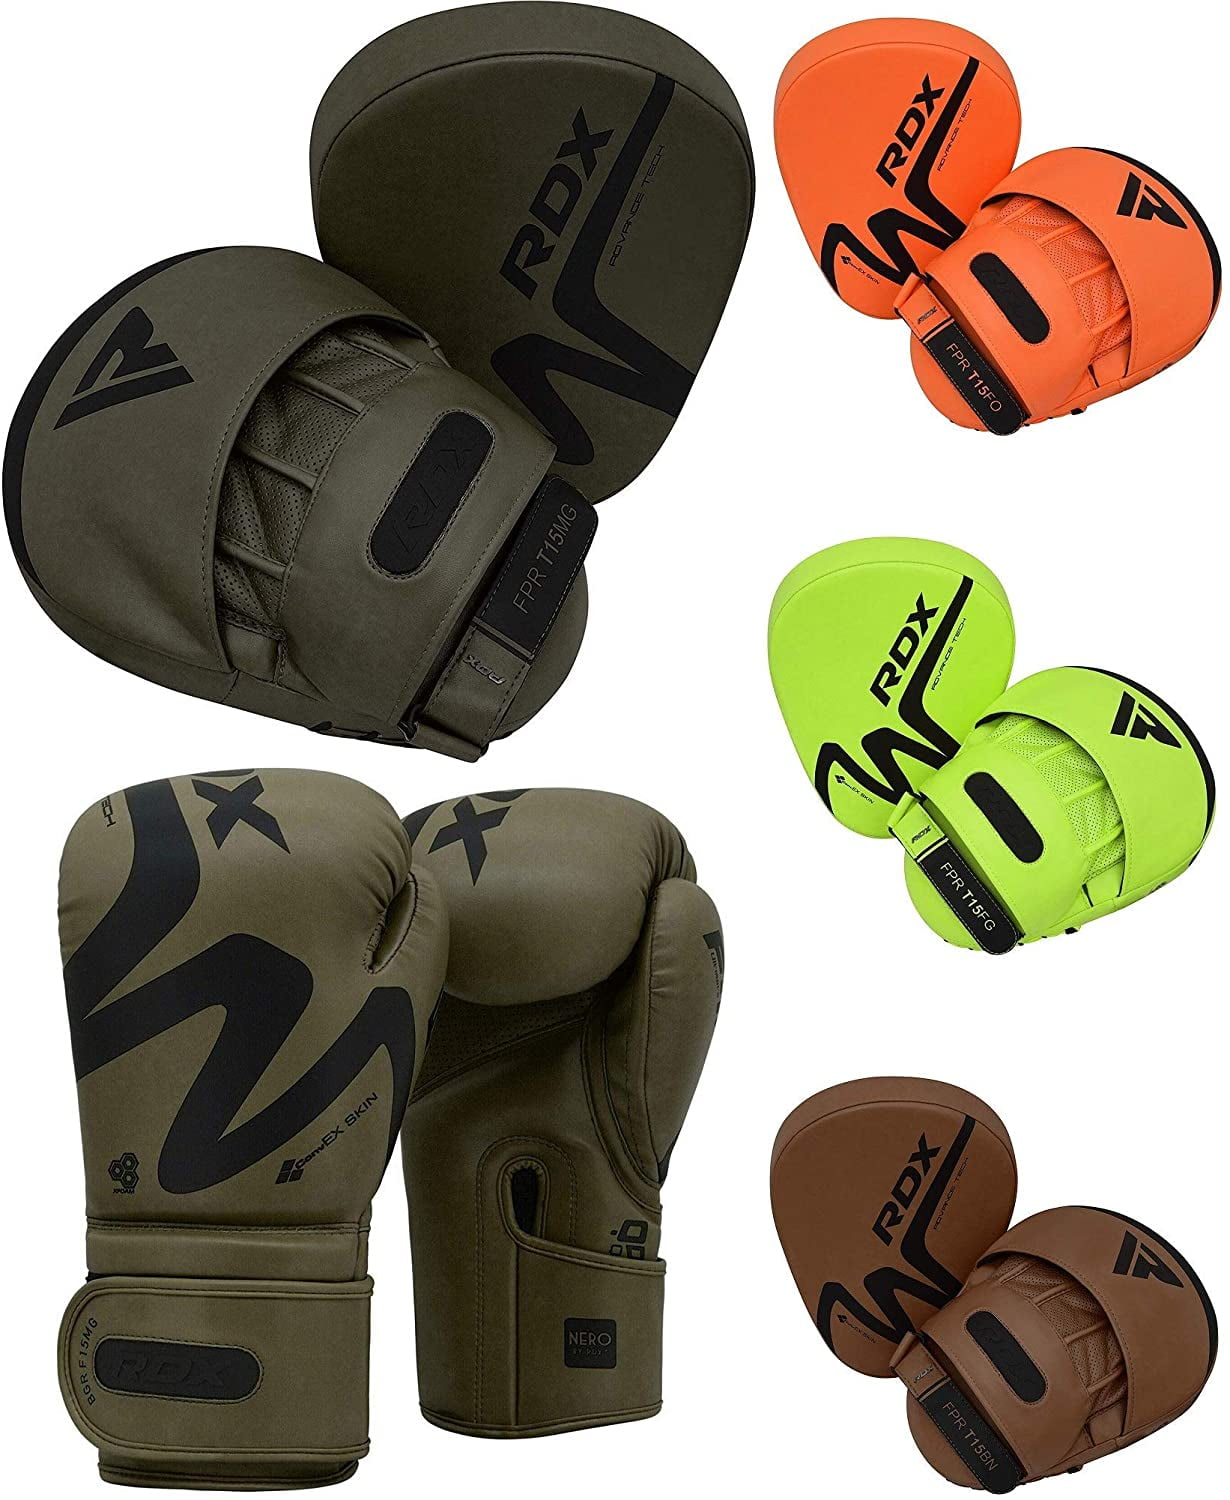 Foot Pads and Boxing Gloves Set Karate & Jabs Mitts Punch Bag Gym Training MMA 